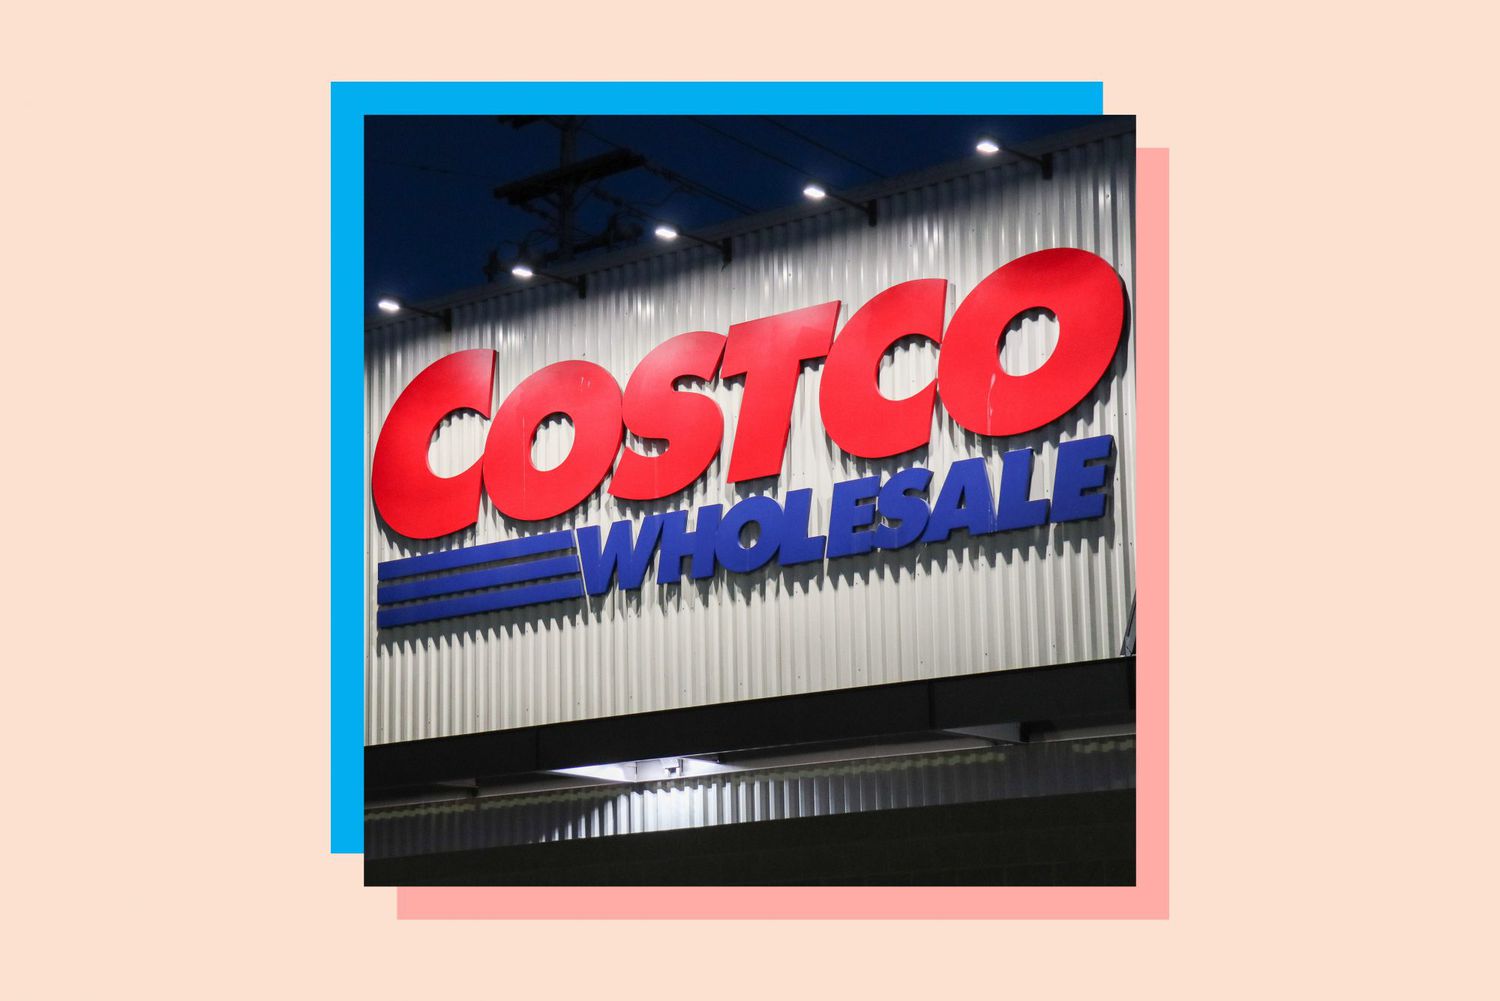 An image of a Costco sign.